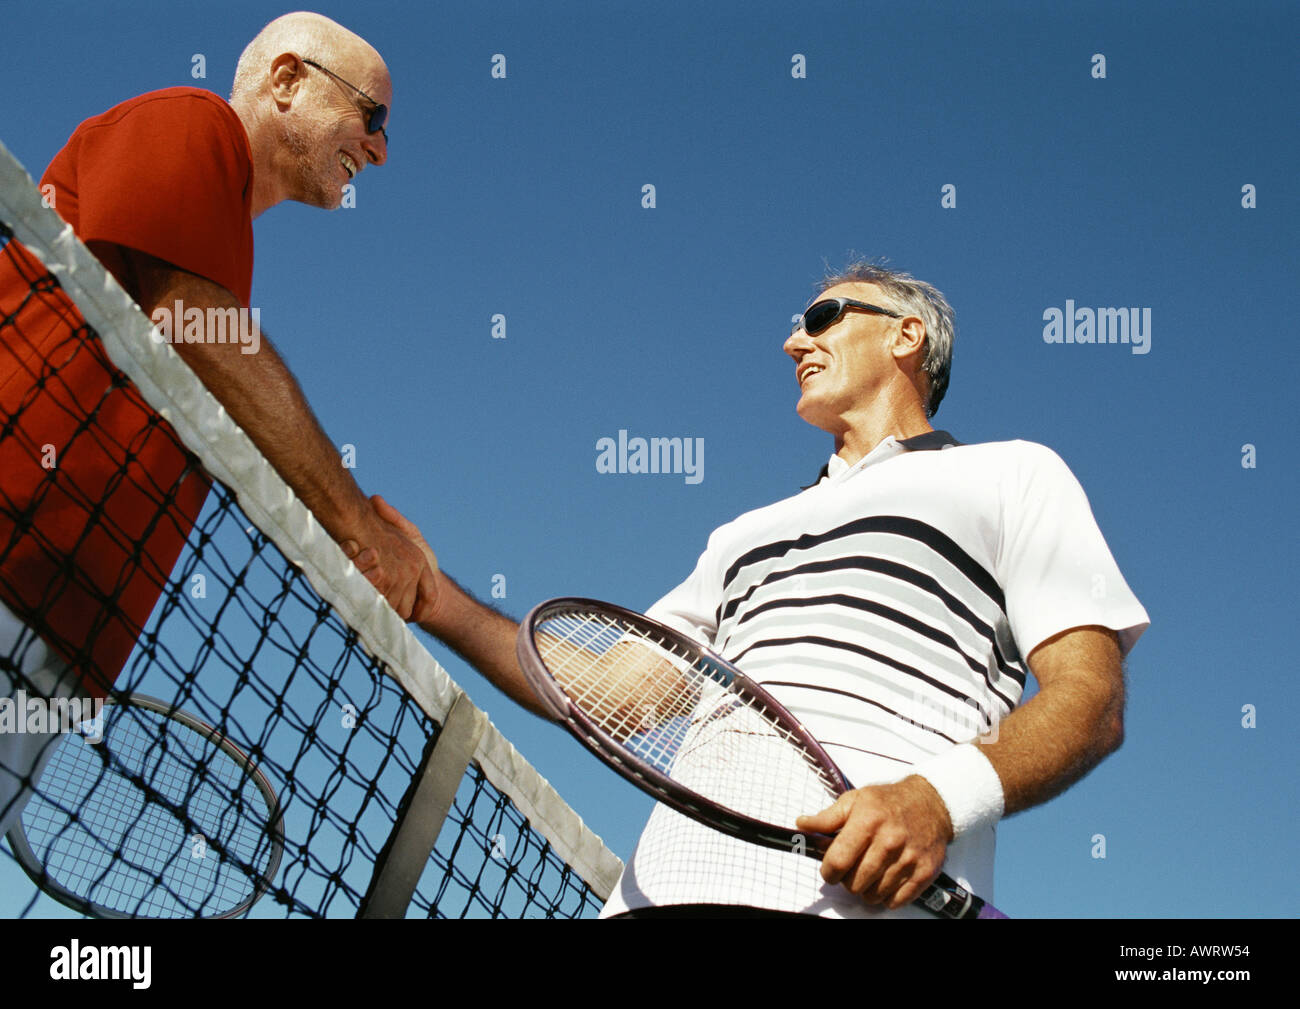 Two mature men shaking hands over tennis net, low angle view Stock Photo